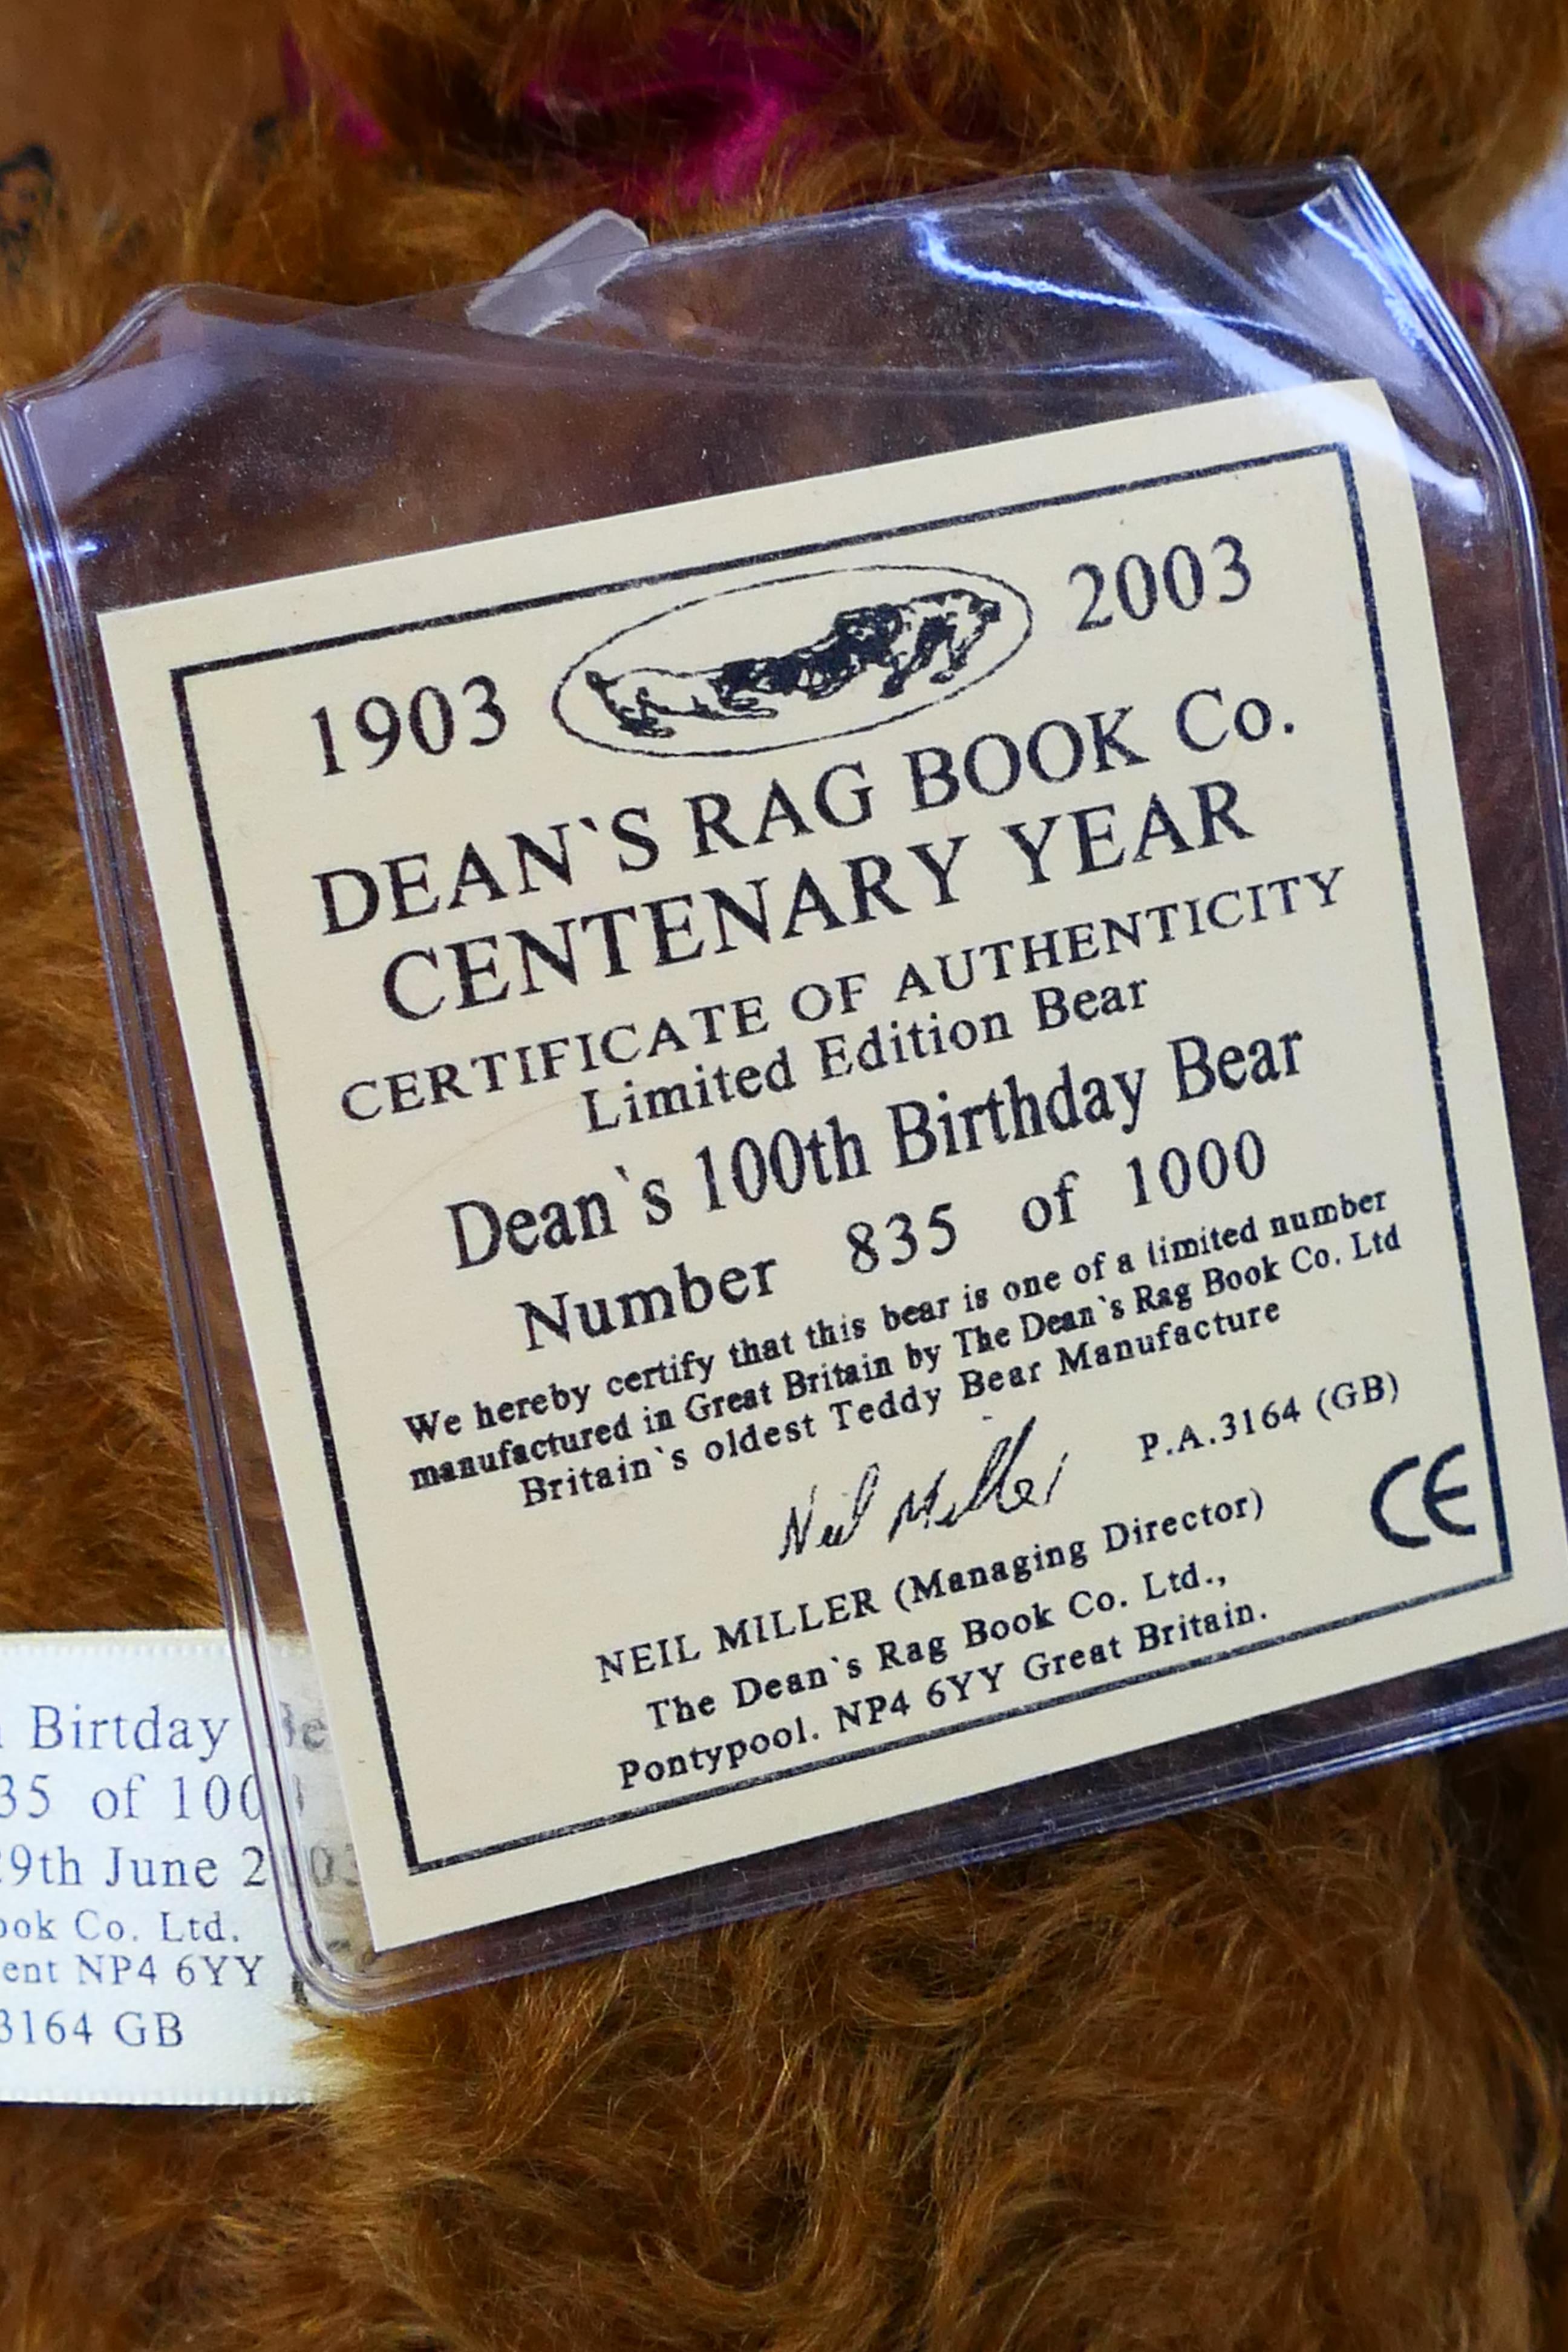 Deans Rag Book - A boxed limited edition 2003 Centenary bear named 100th Birthday Bear number 835 - Image 7 of 9